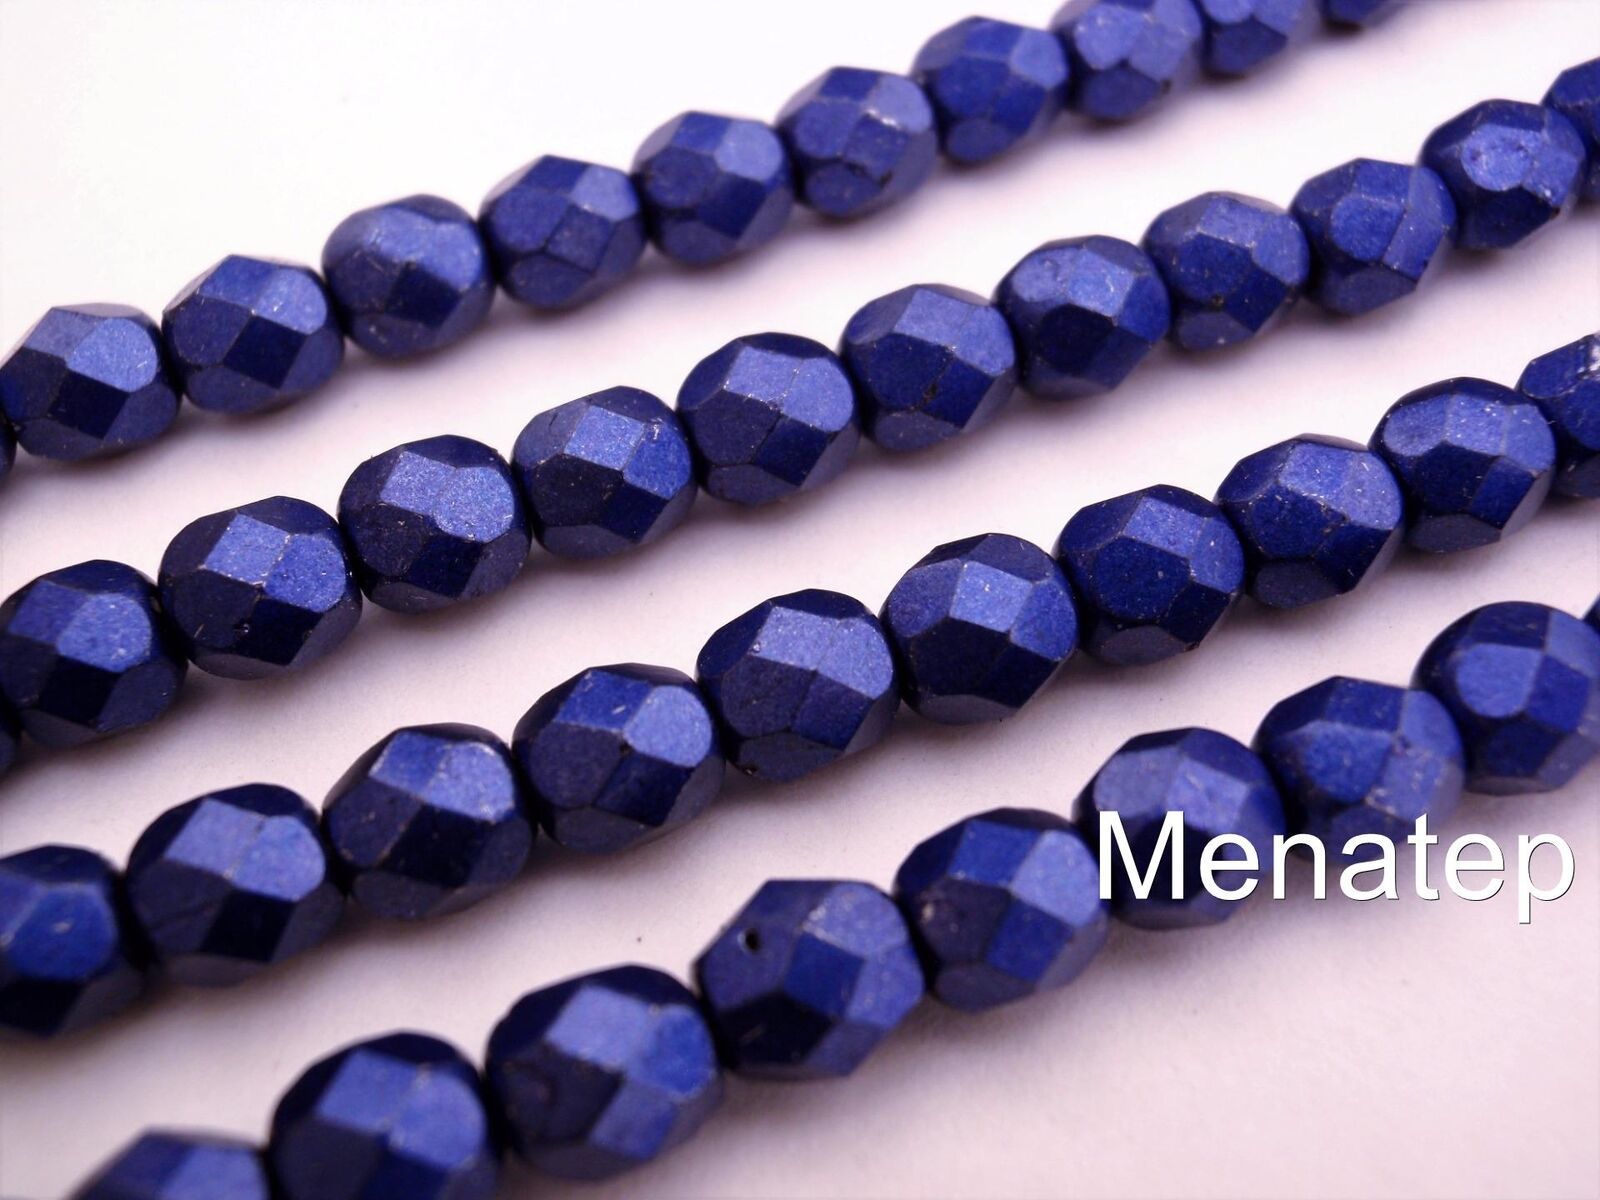 Primary image for 25  6 mm Czech Glass Fire Polished Beads: Saturated Metallic - Lapis Blue